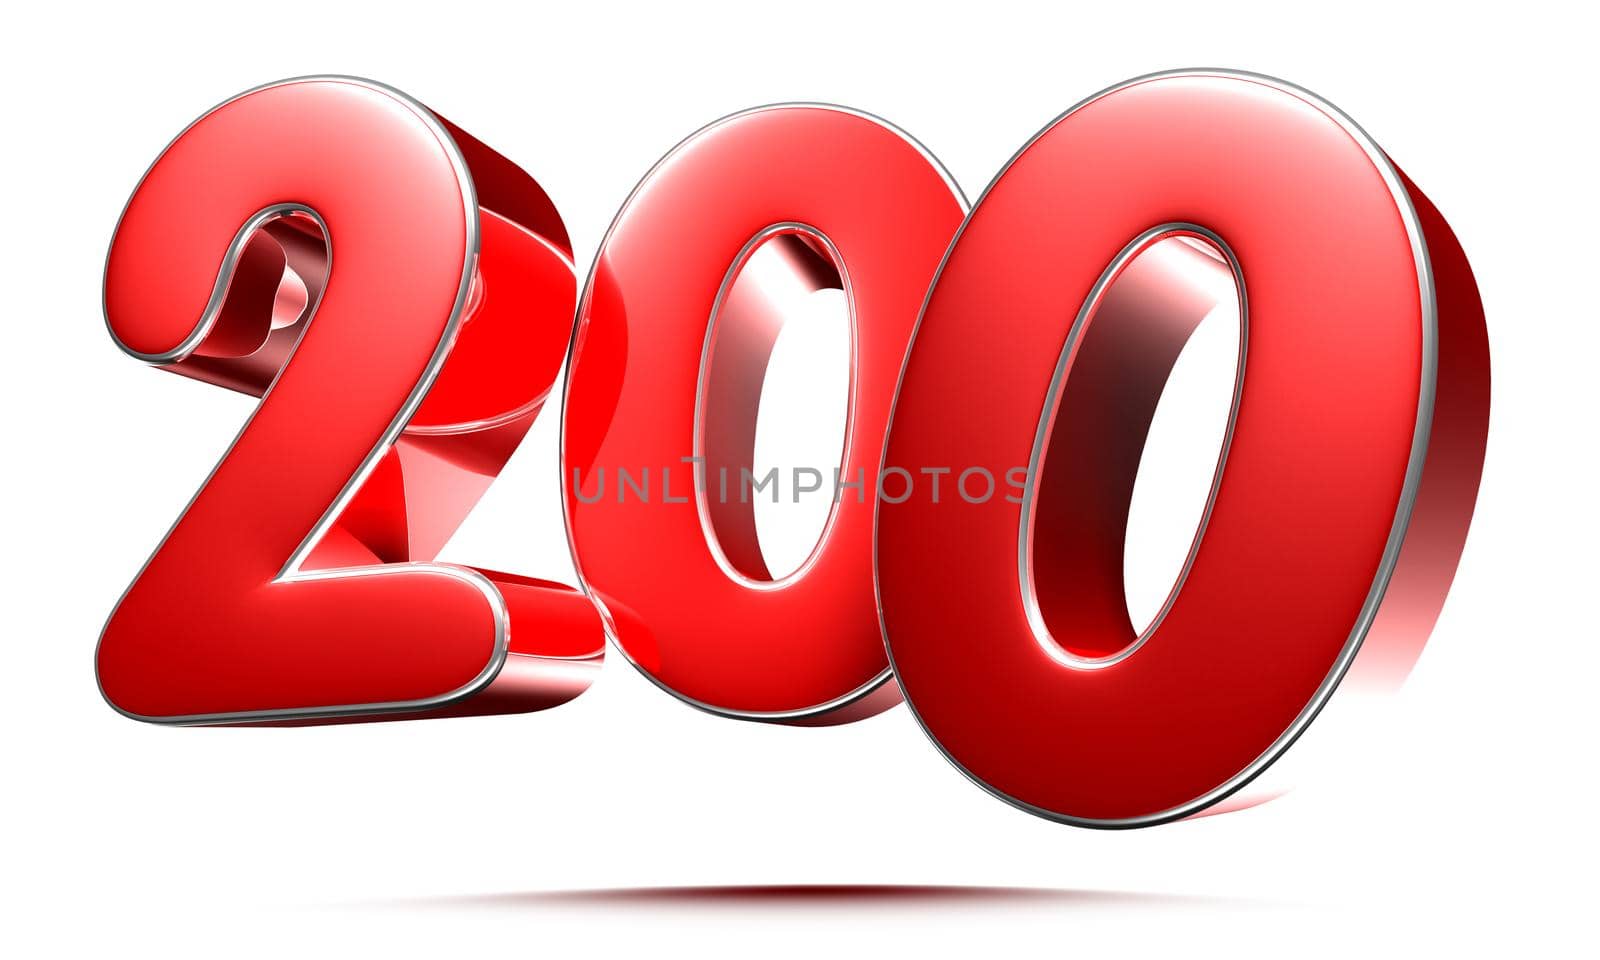 Rounded red numbers 200 on white background 3D illustration with clipping path by thitimontoyai